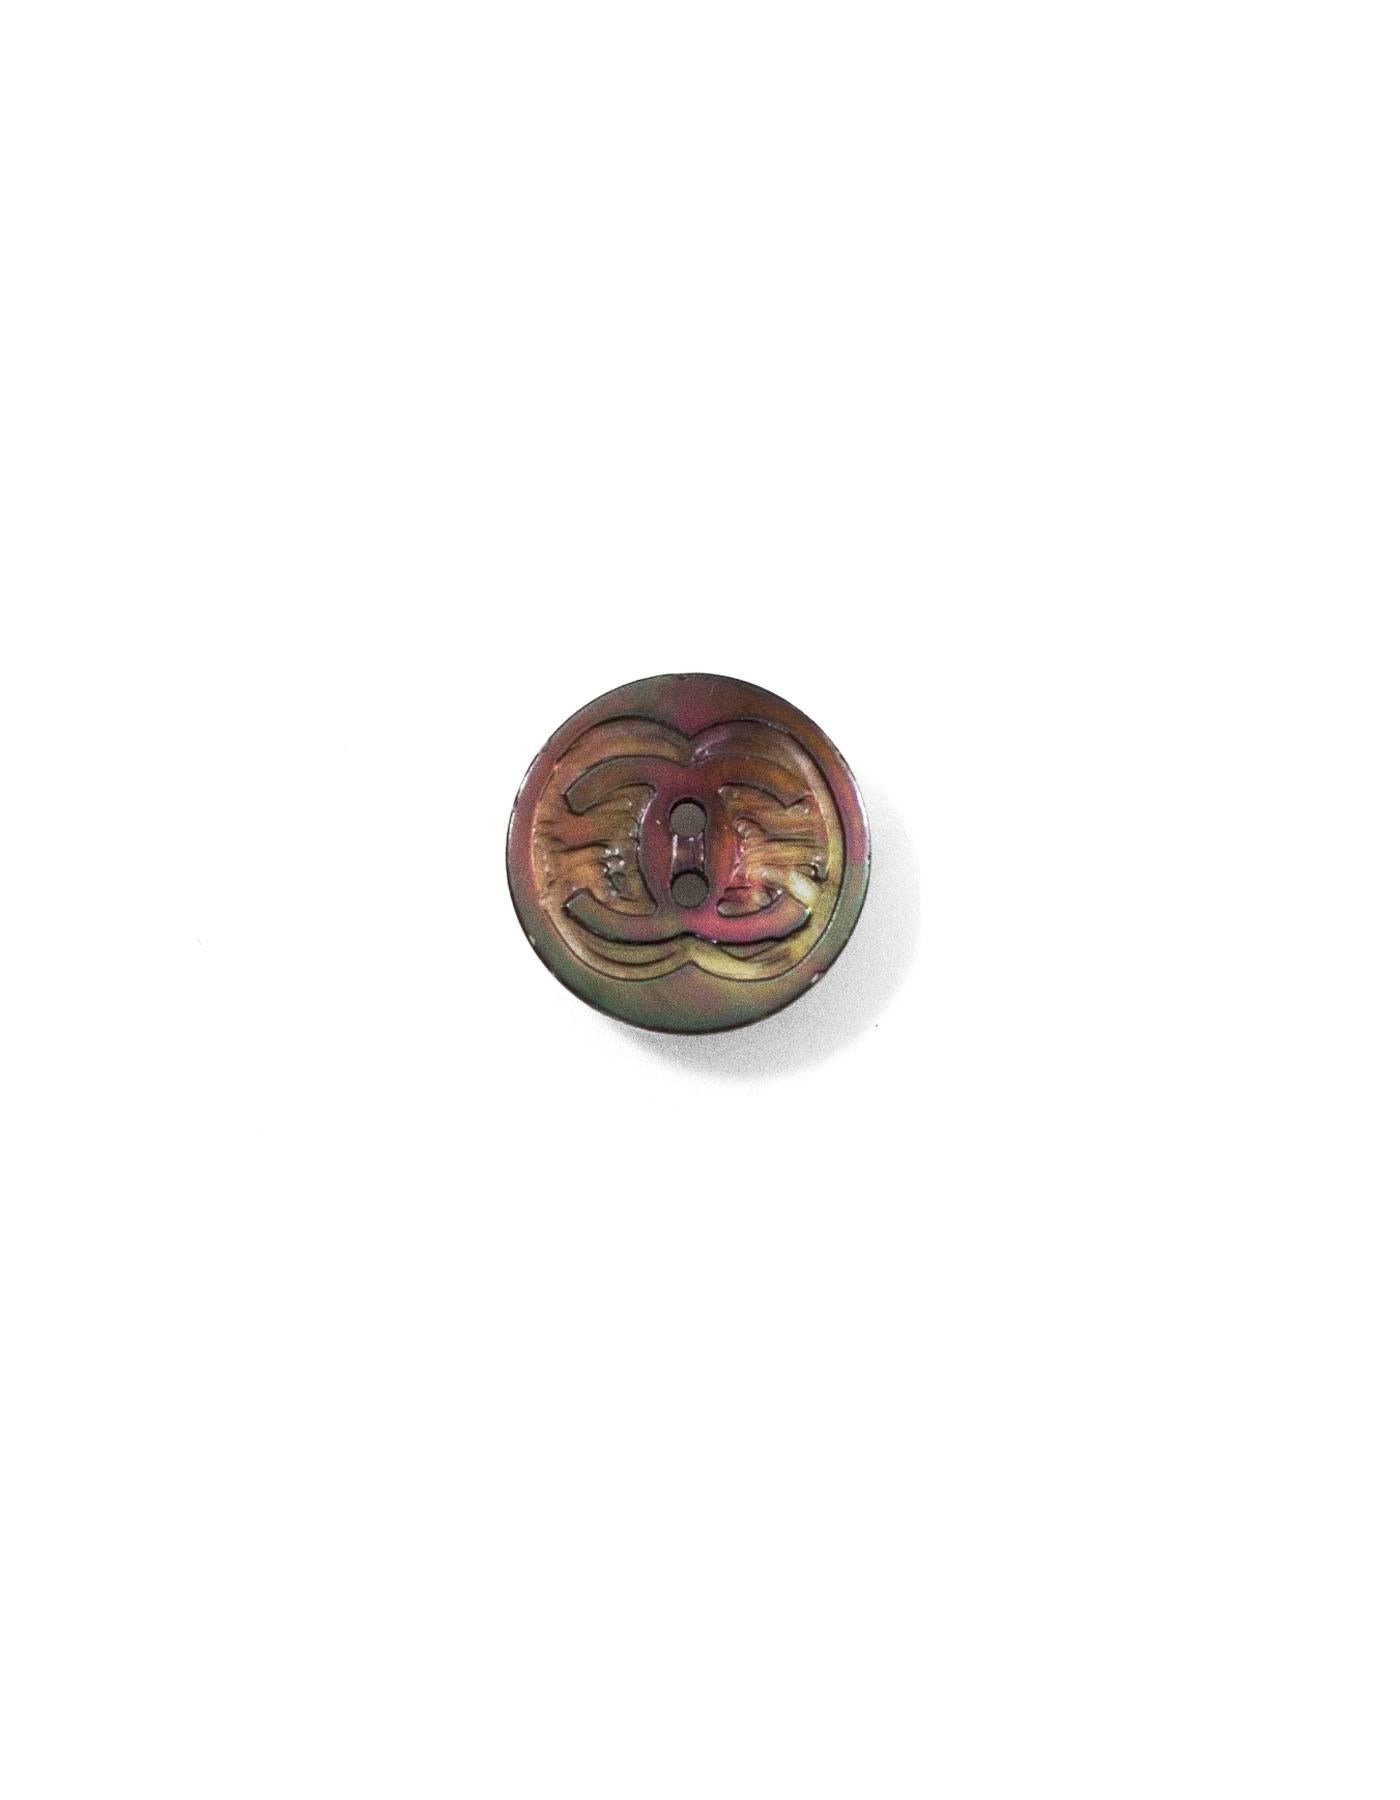 Chanel Iridescent CC Glass Buttons
Features set of three 18mm buttons

Color: Grey/iridescent
Materials: Glass
Stamp: CC
Overall Condition: Excellent good pre-owned condition, light surface marks

Measurements: 
Diameter: 18mm